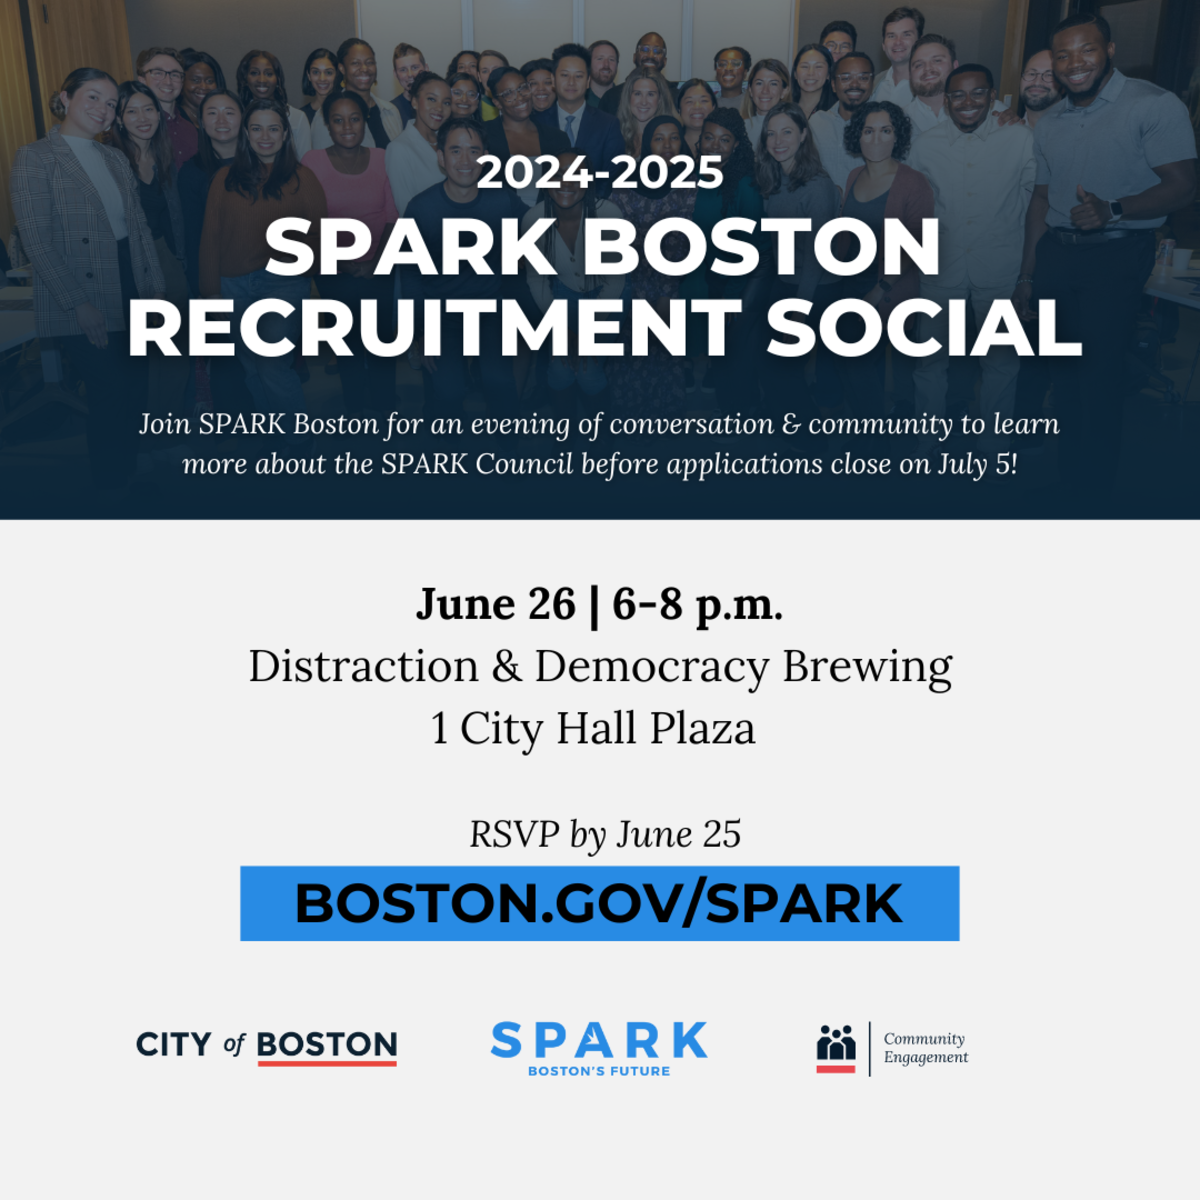 2024-2025 SPARK BOSTON RECRUITMENT SOCIAL: June 26 6-8 p.m. at Distraction and Democracy Brewing 1 City Hall Plaza RSVP by June 25 at boston.gov/SPARK